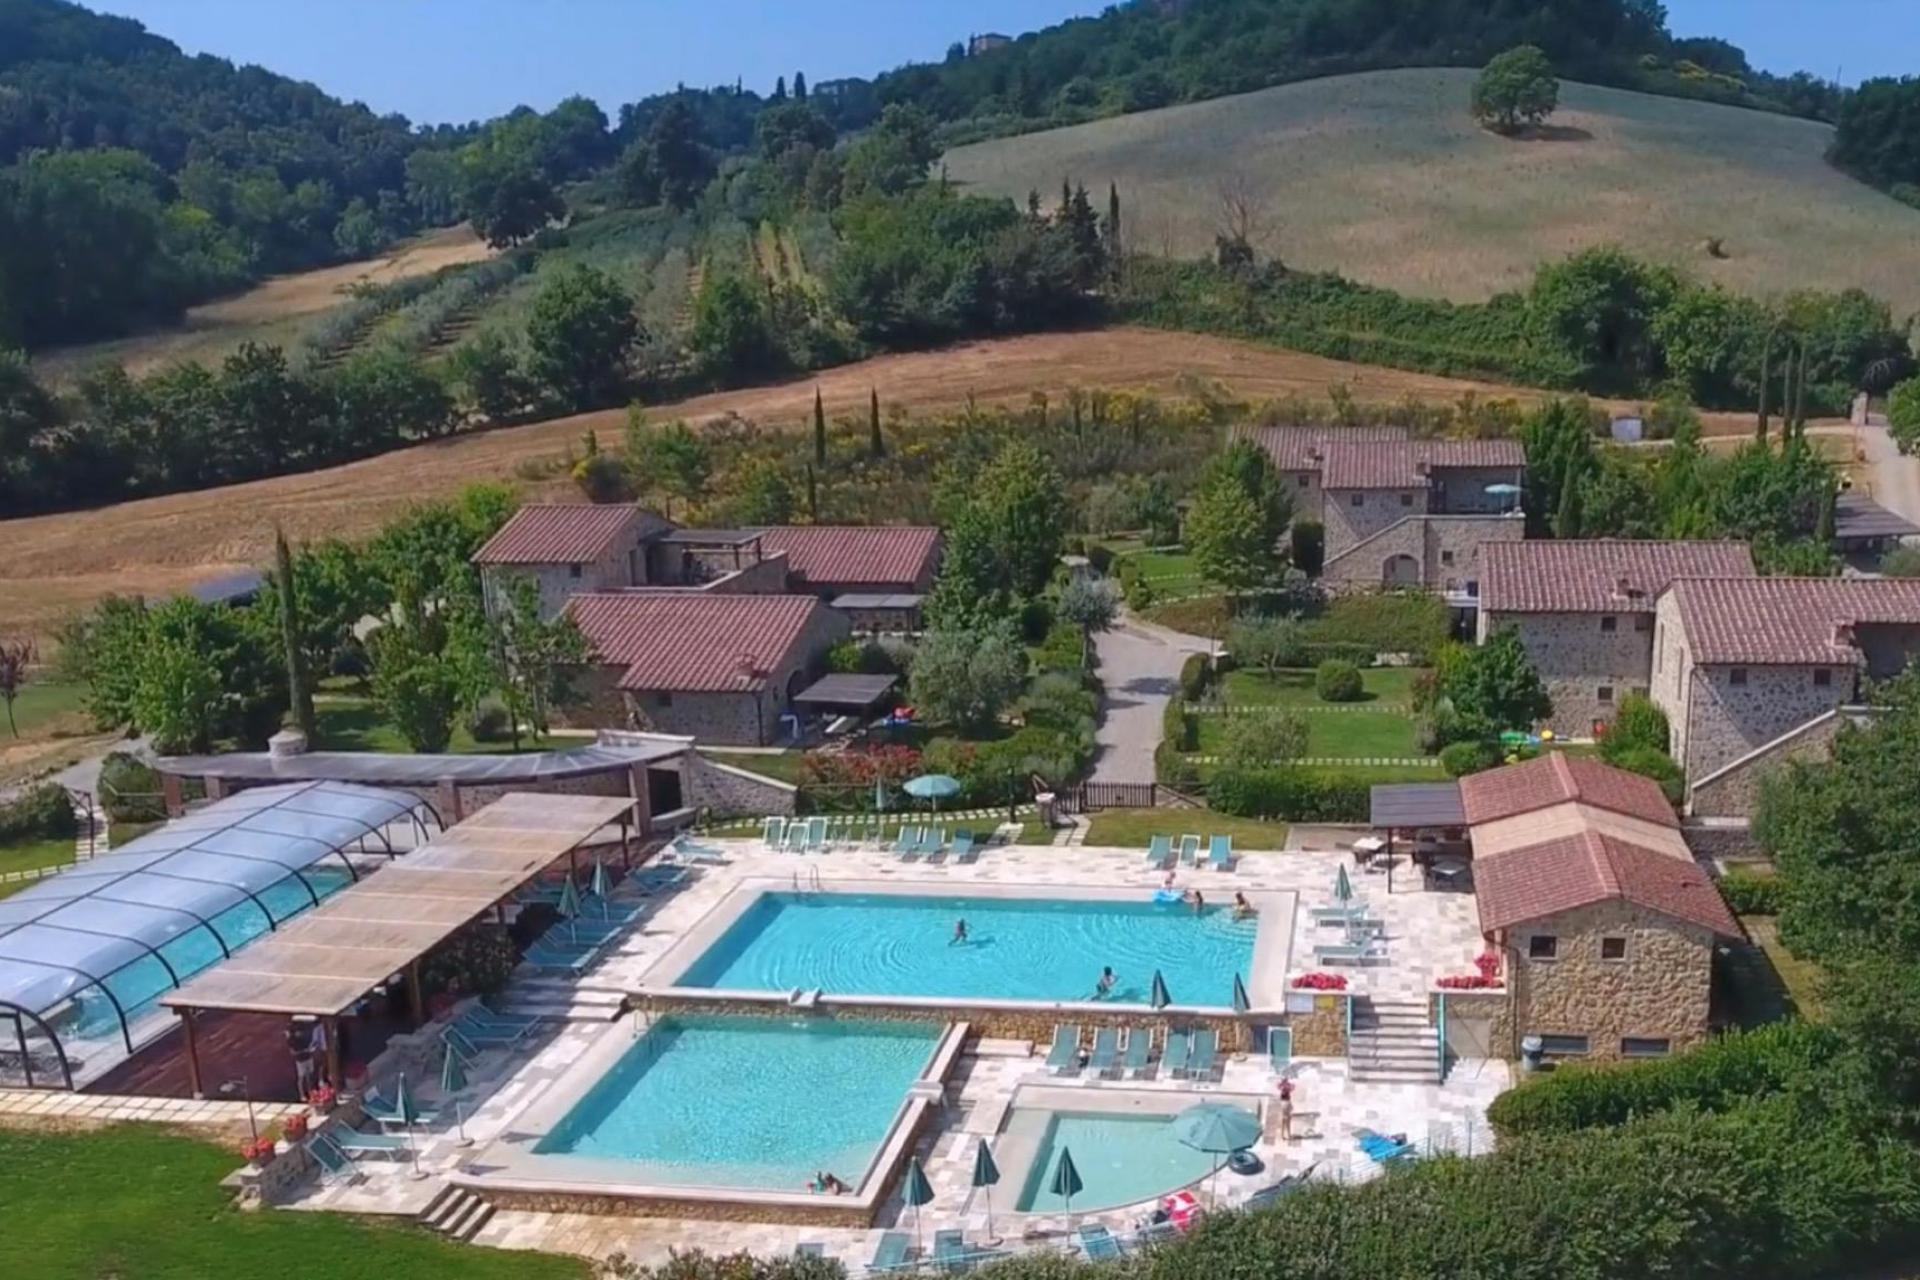 Family resort in the heart of Tuscany